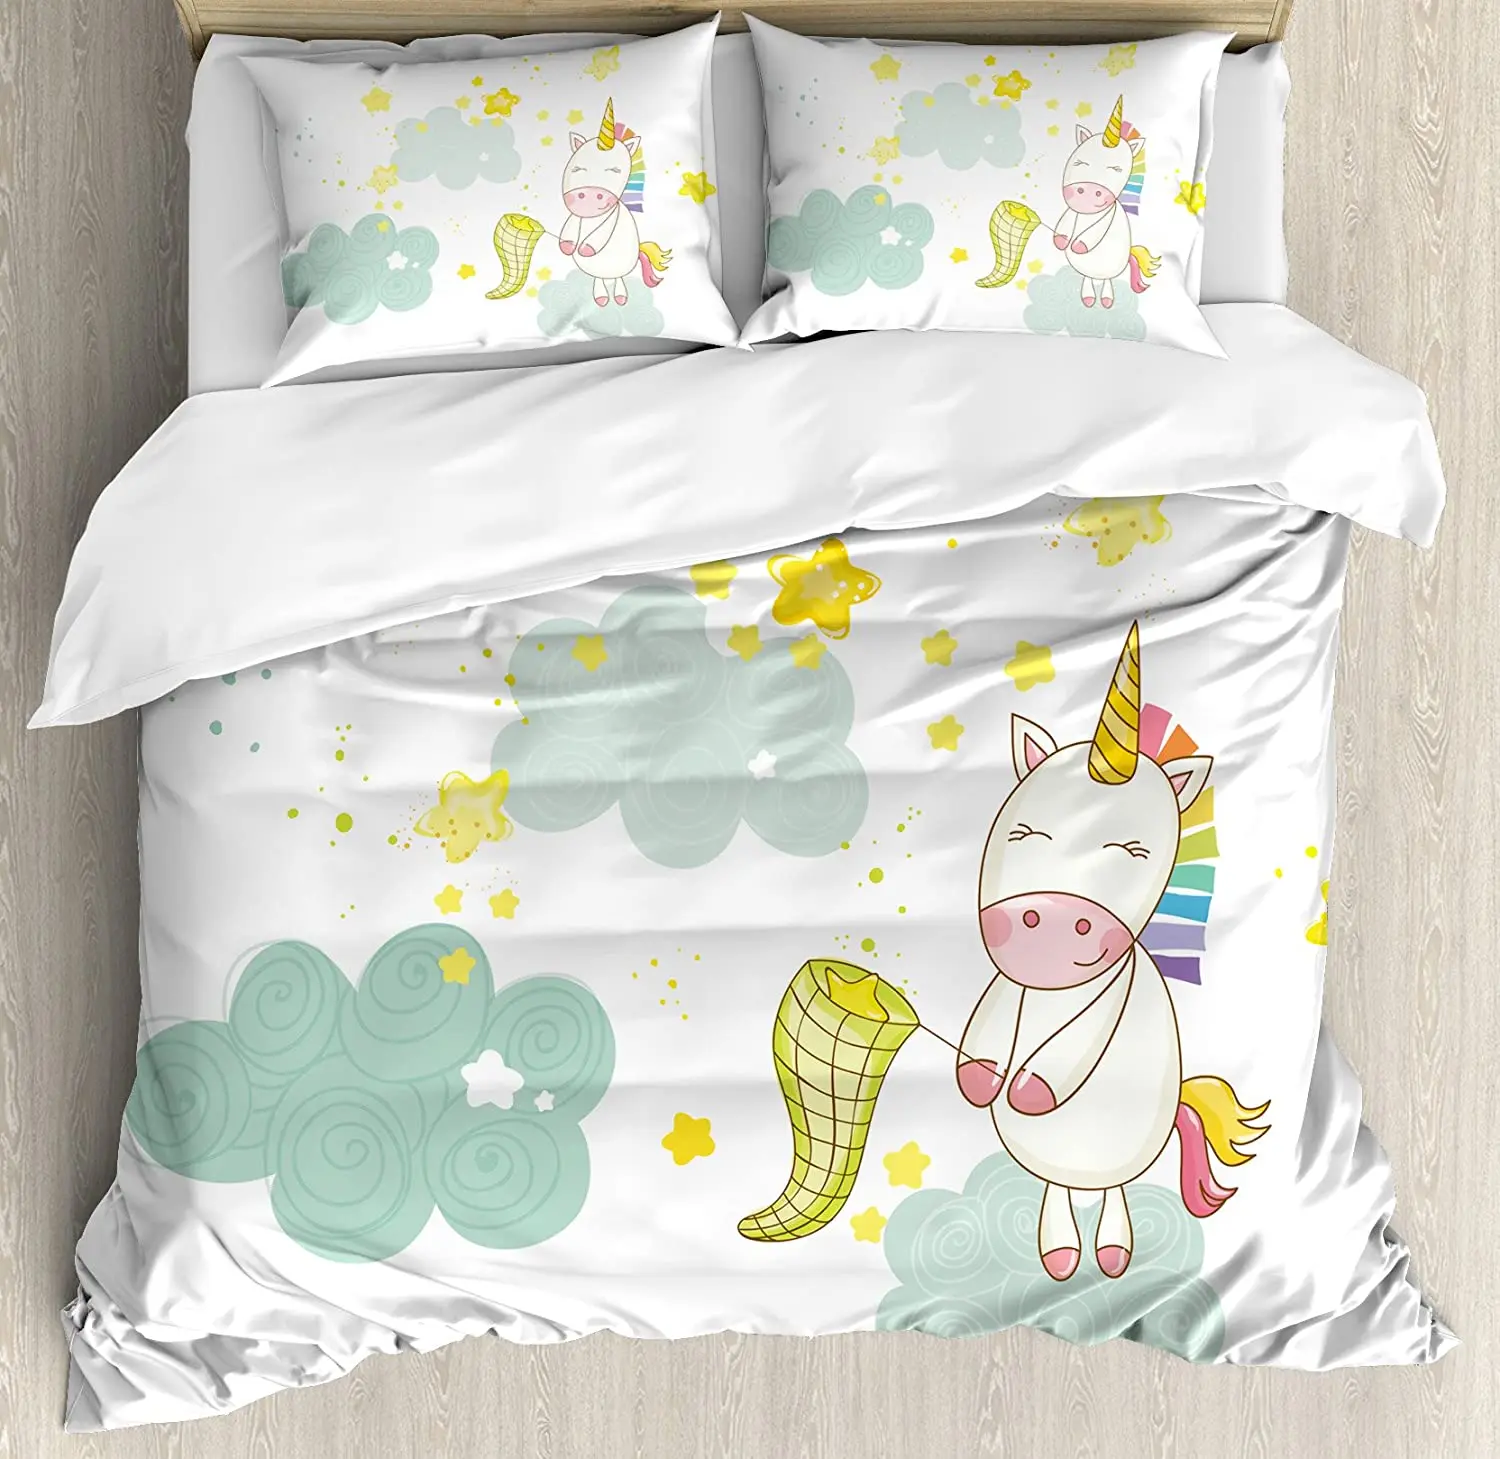 Unicorn Bedding Set For Bedroom Bed Home Baby Mystic Unicorn Girl Sitting on Fluffy Cloud Duvet Cover Quilt Cover And Pillowcase